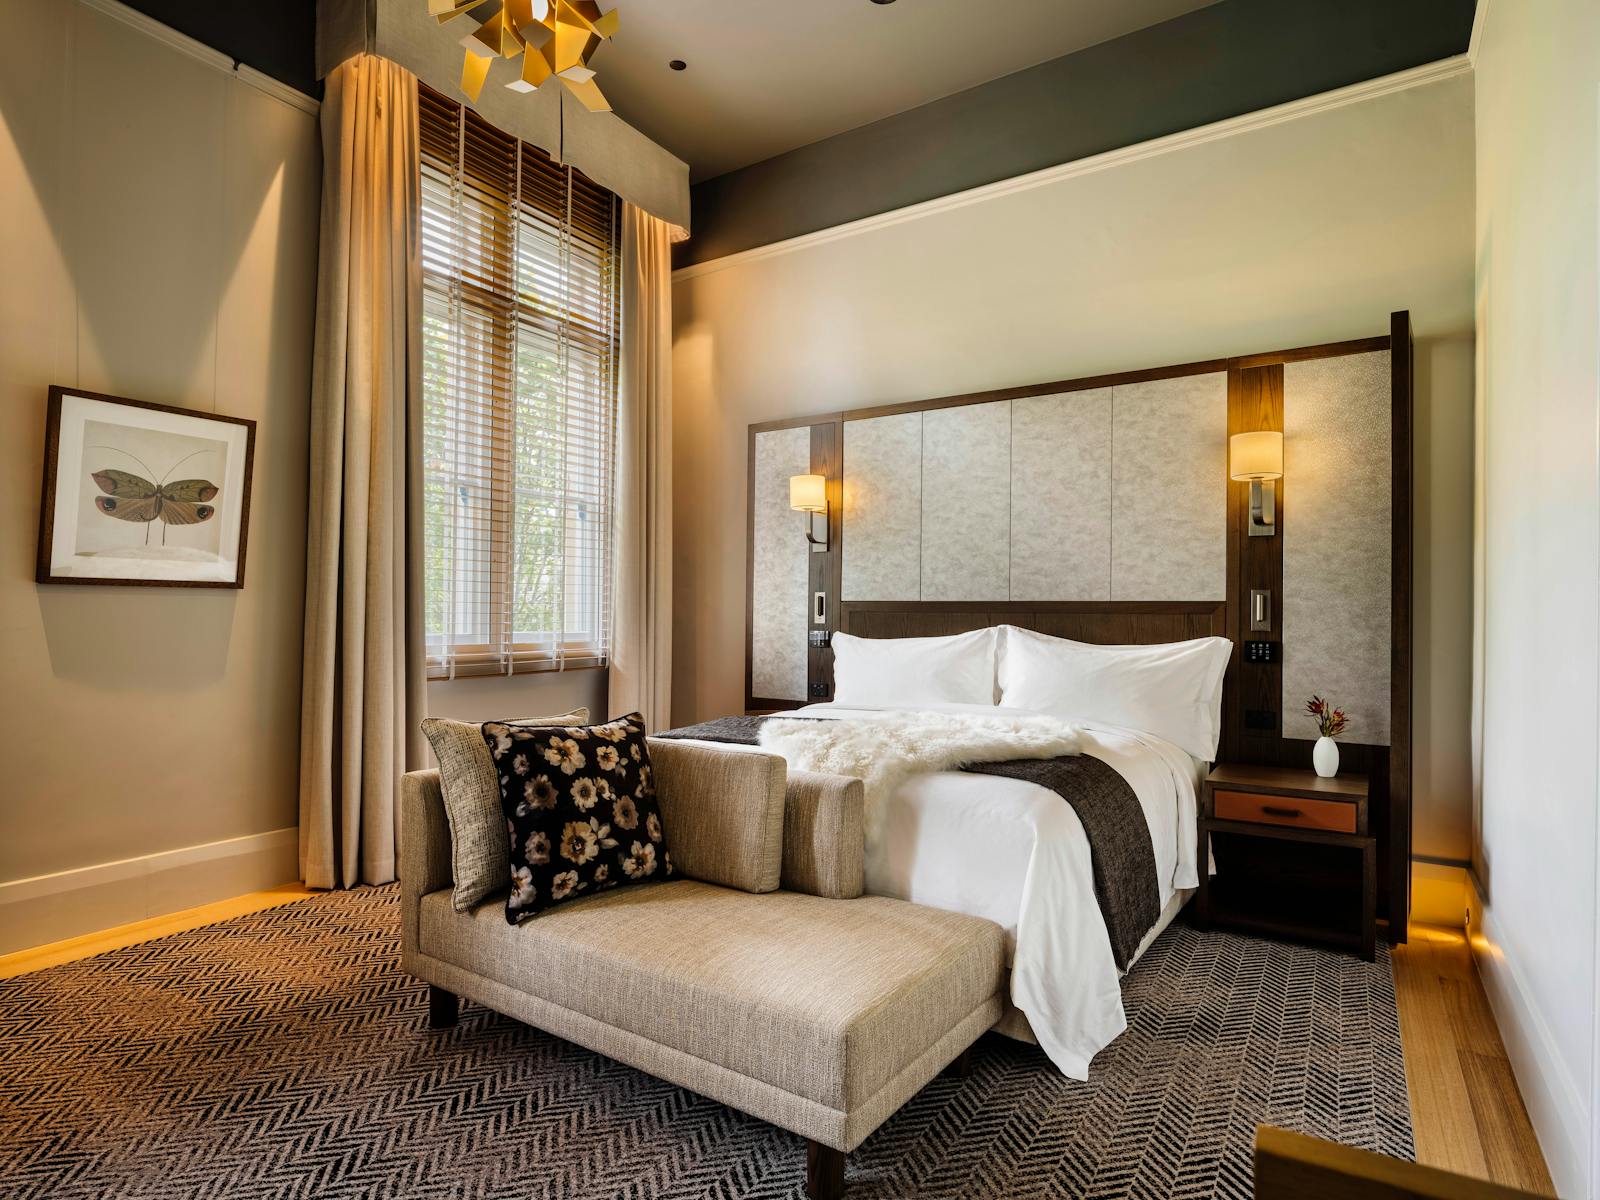 Our Heritage guest rooms provide a feeling of calm and quietude within reach of Hobart’s waterfront.